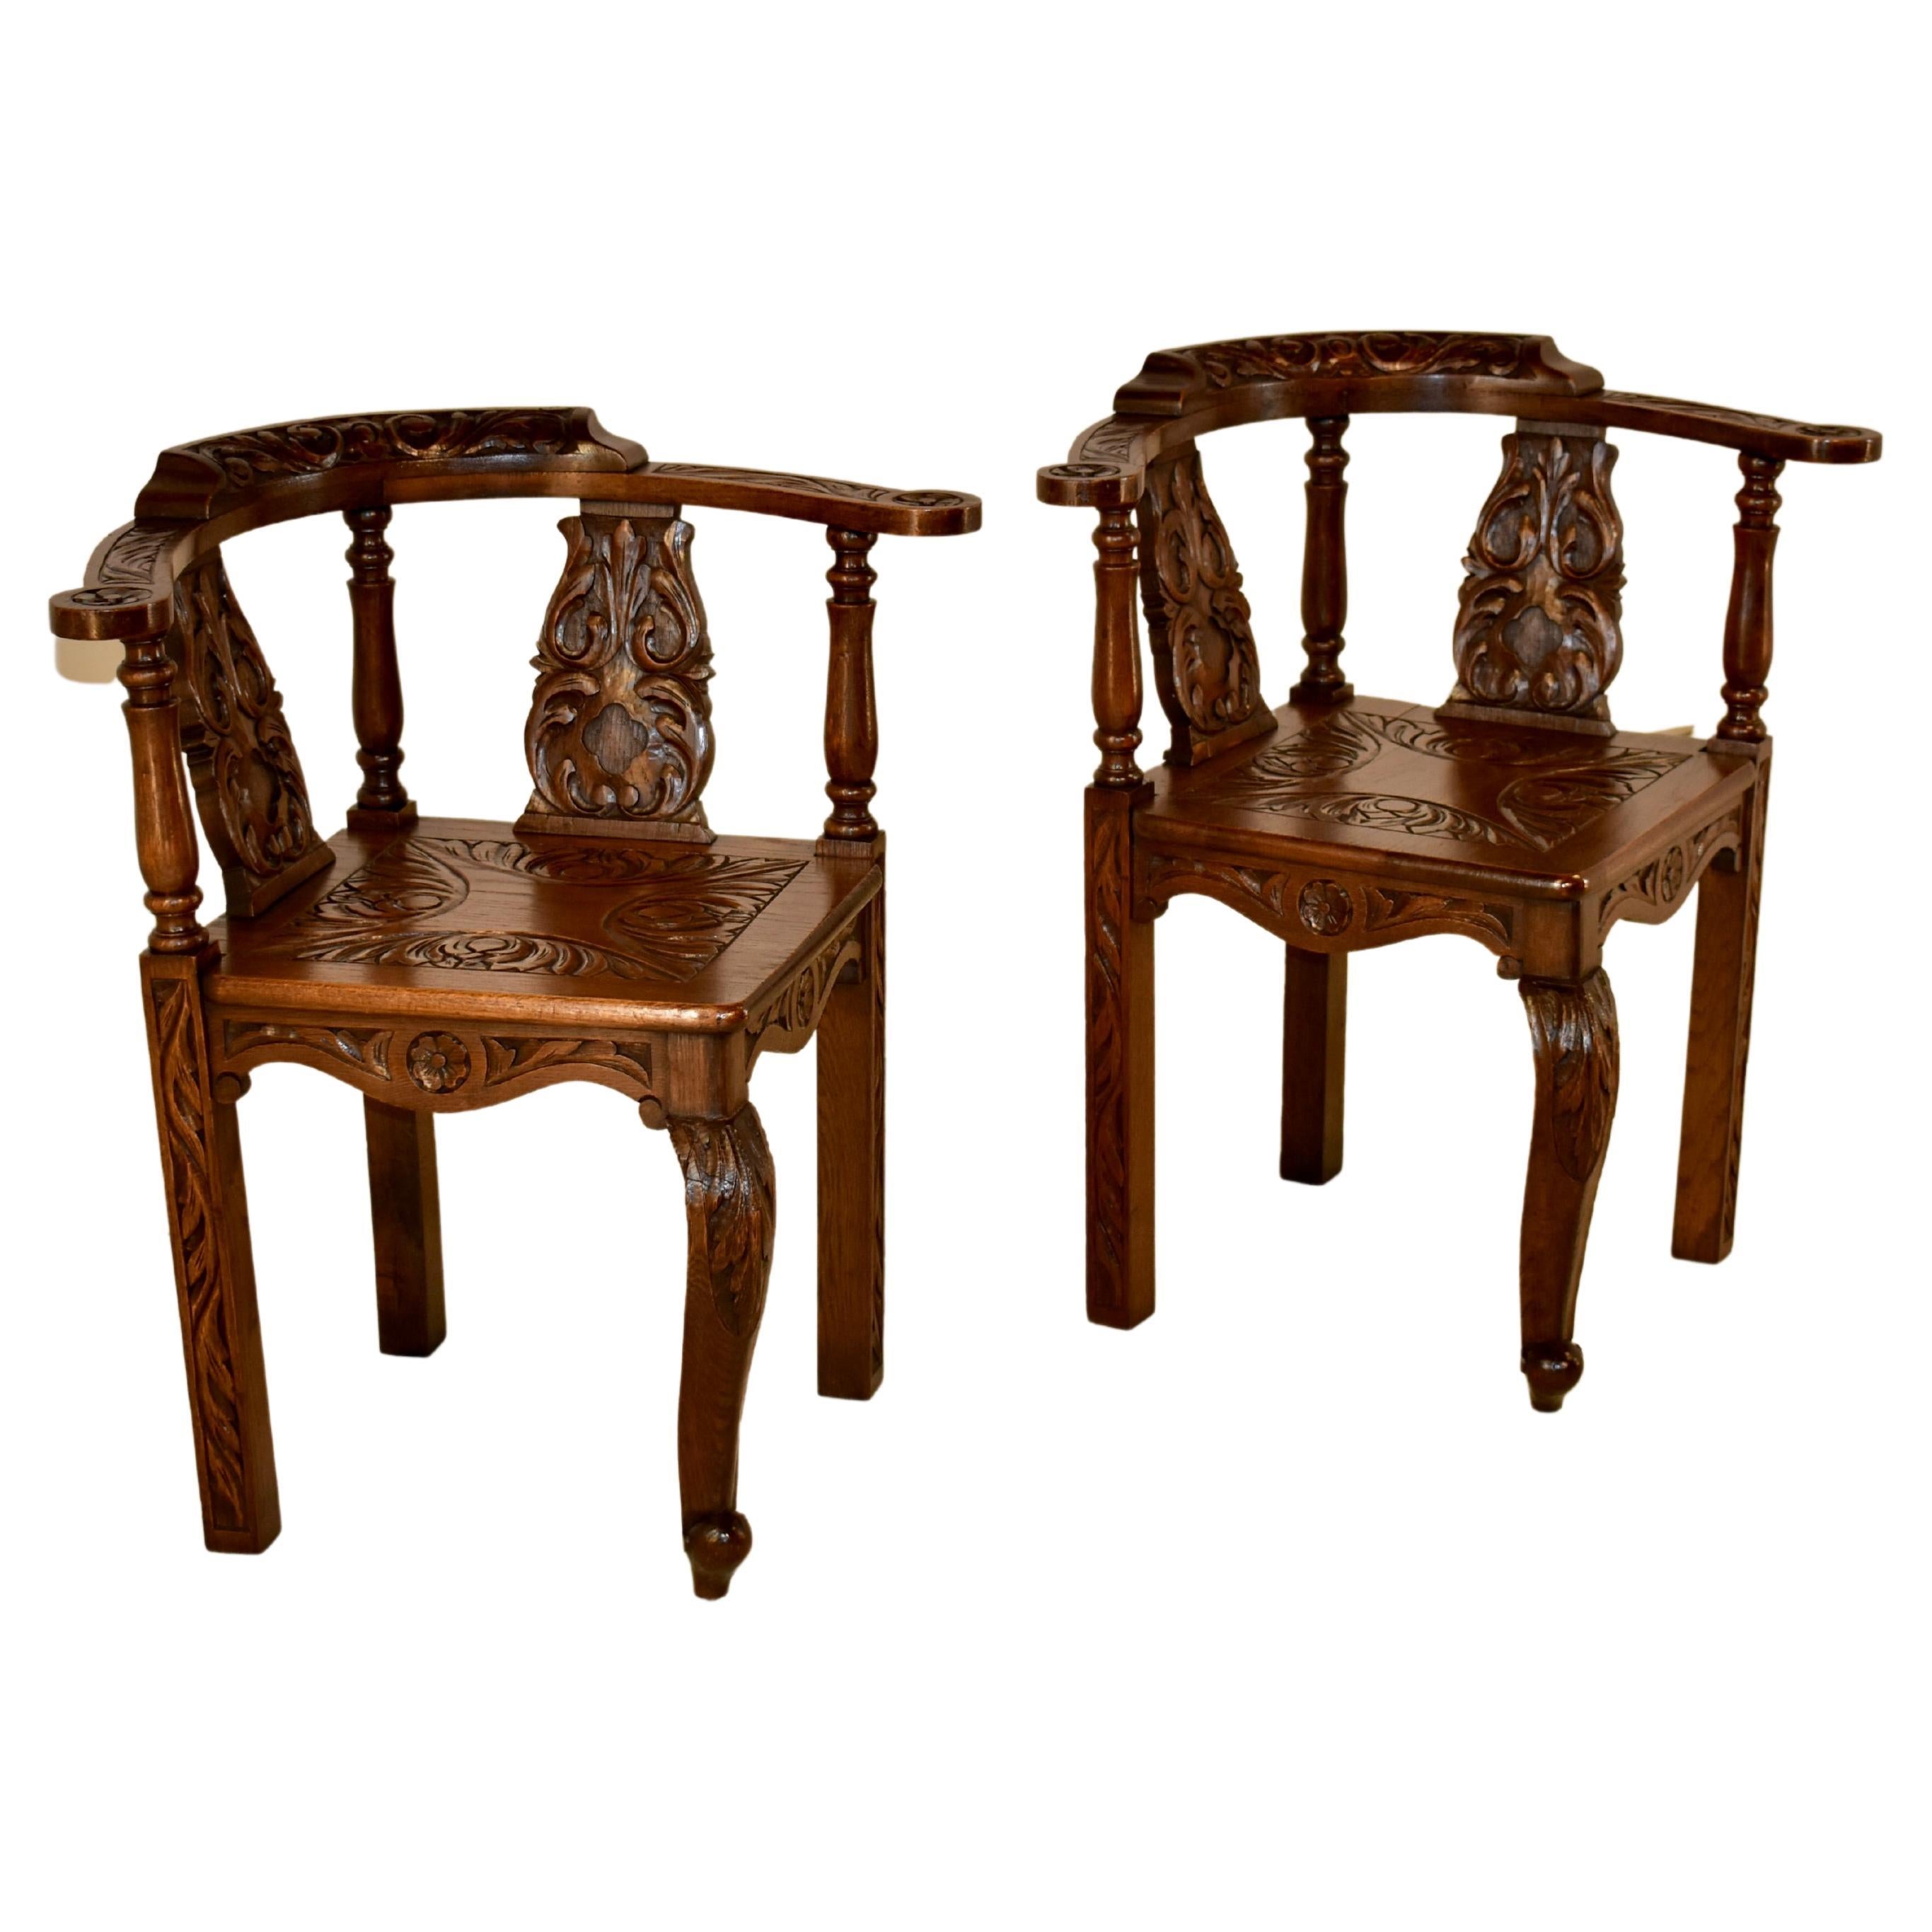 Pair of 19th Century Carved Oak Corner Chairs